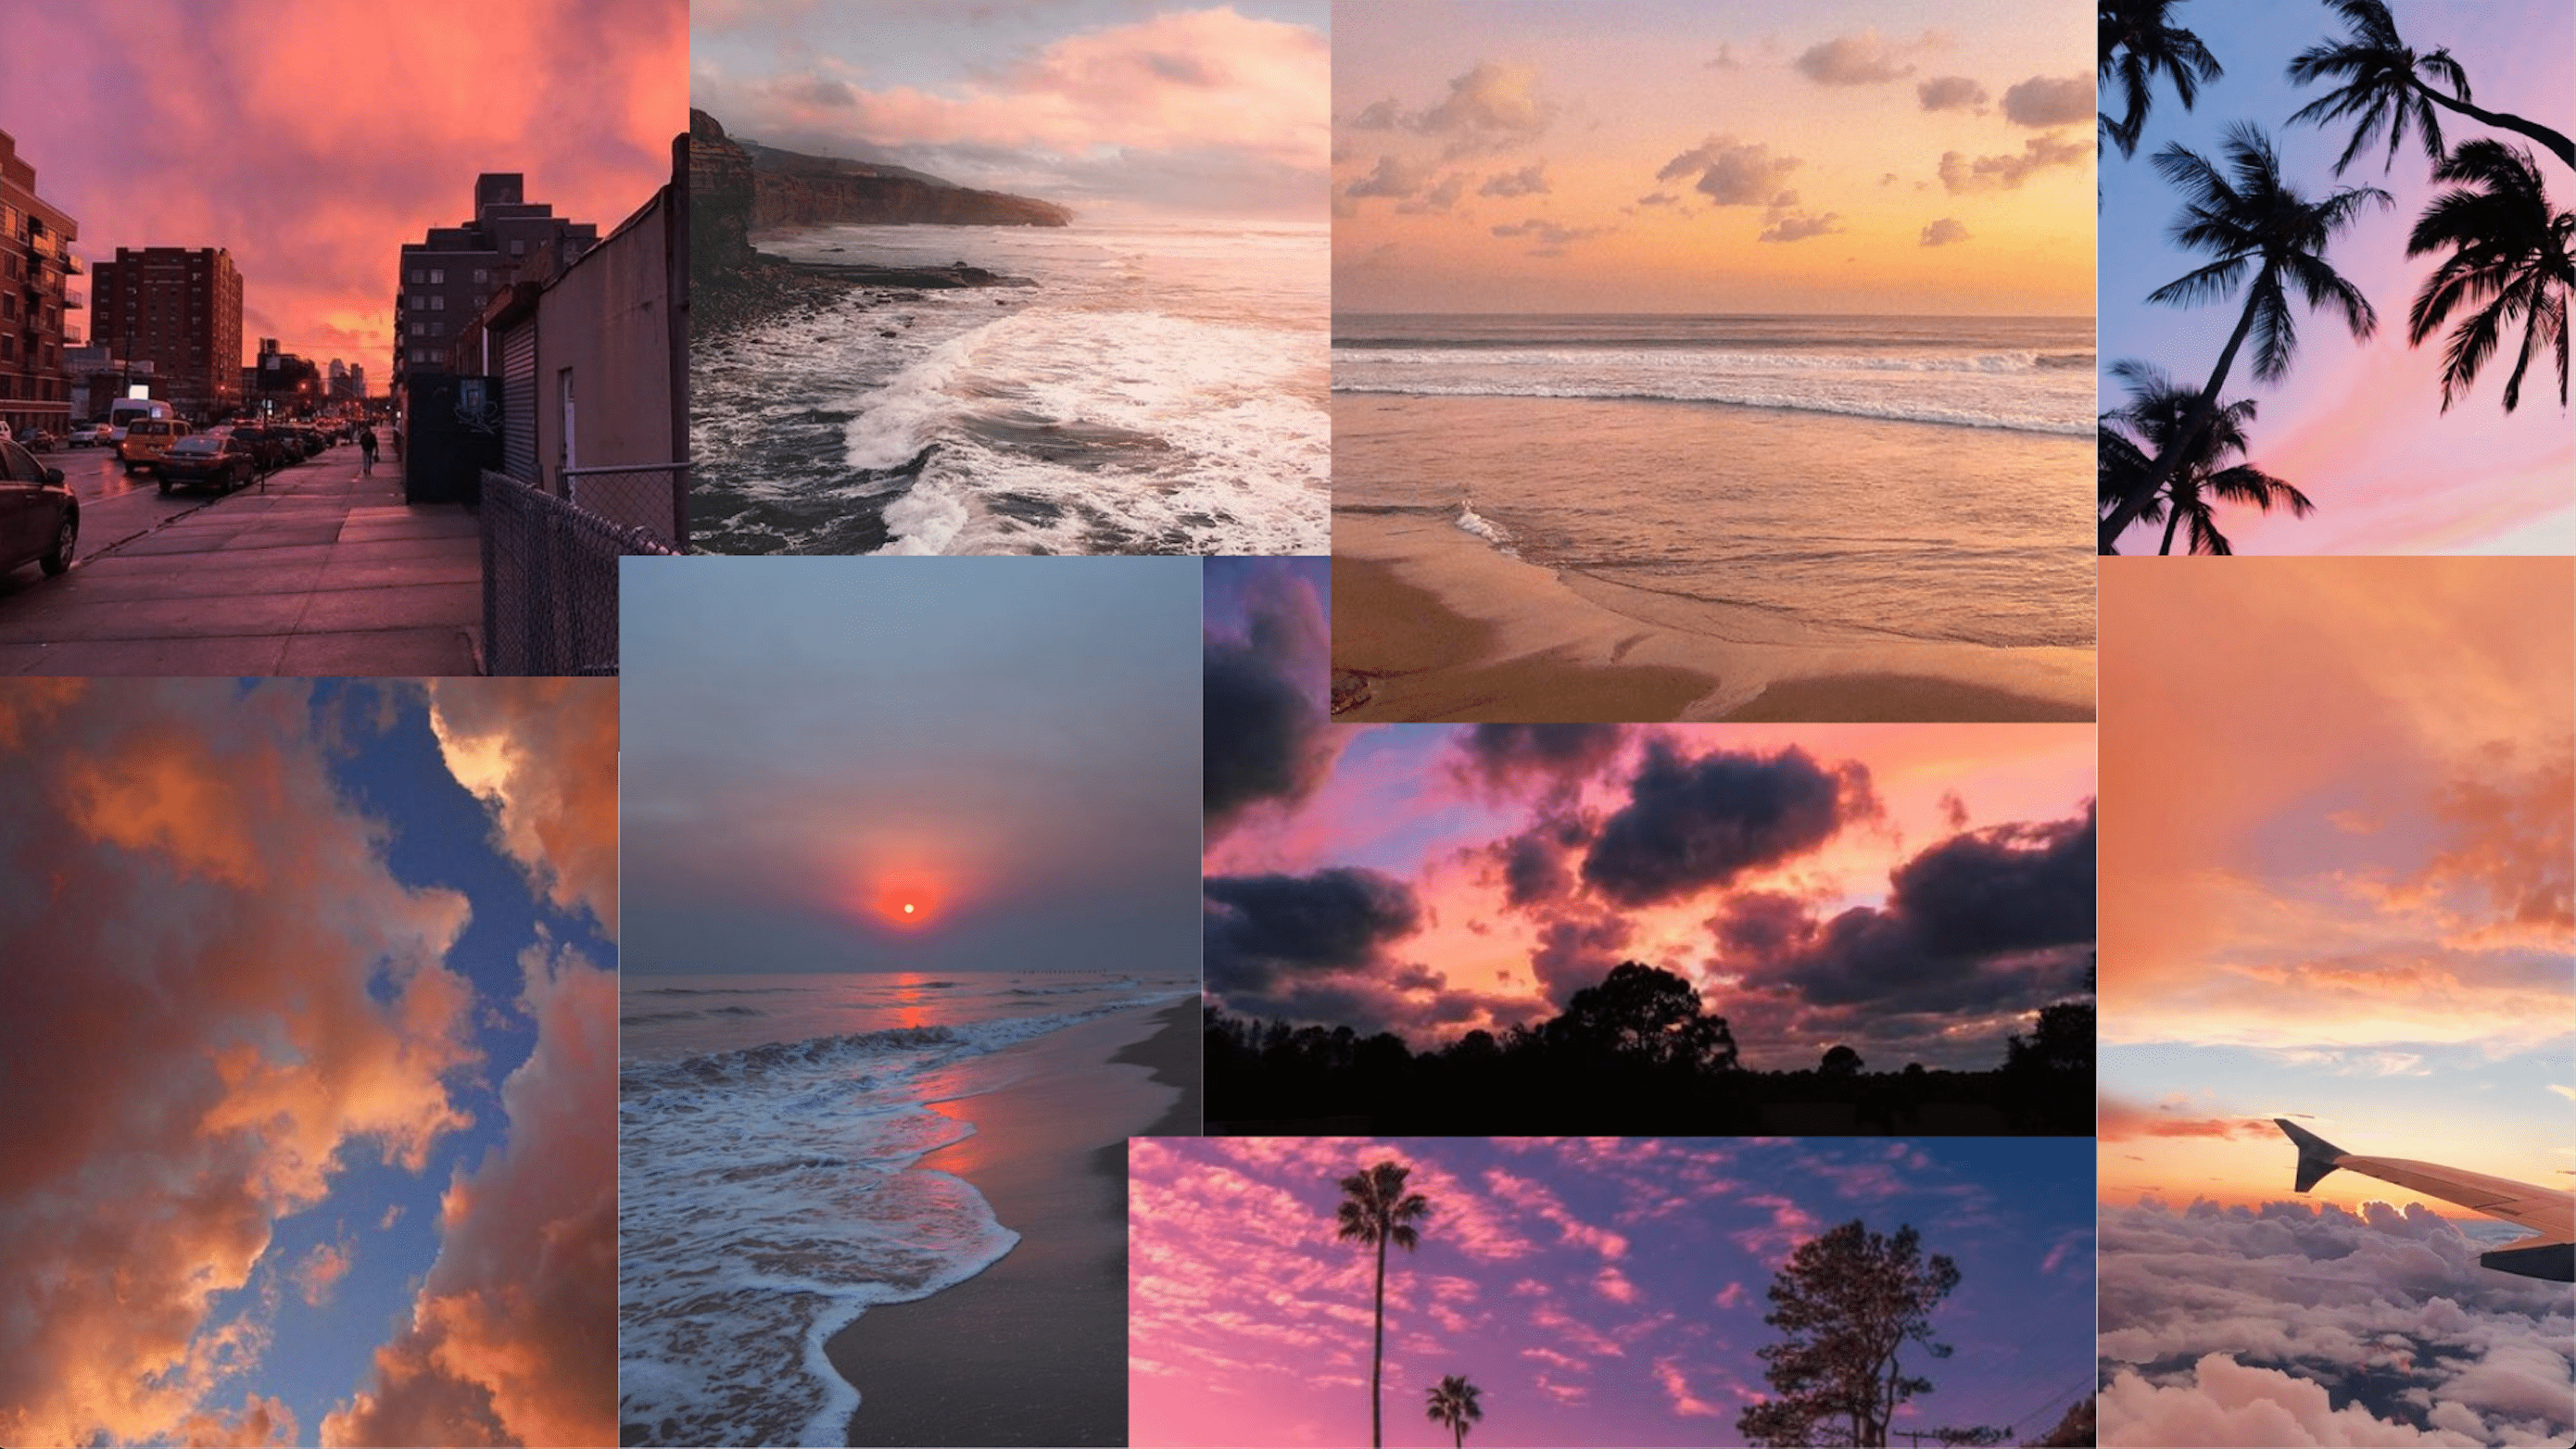 Collage of sunset photos from the city and beach - Sunset